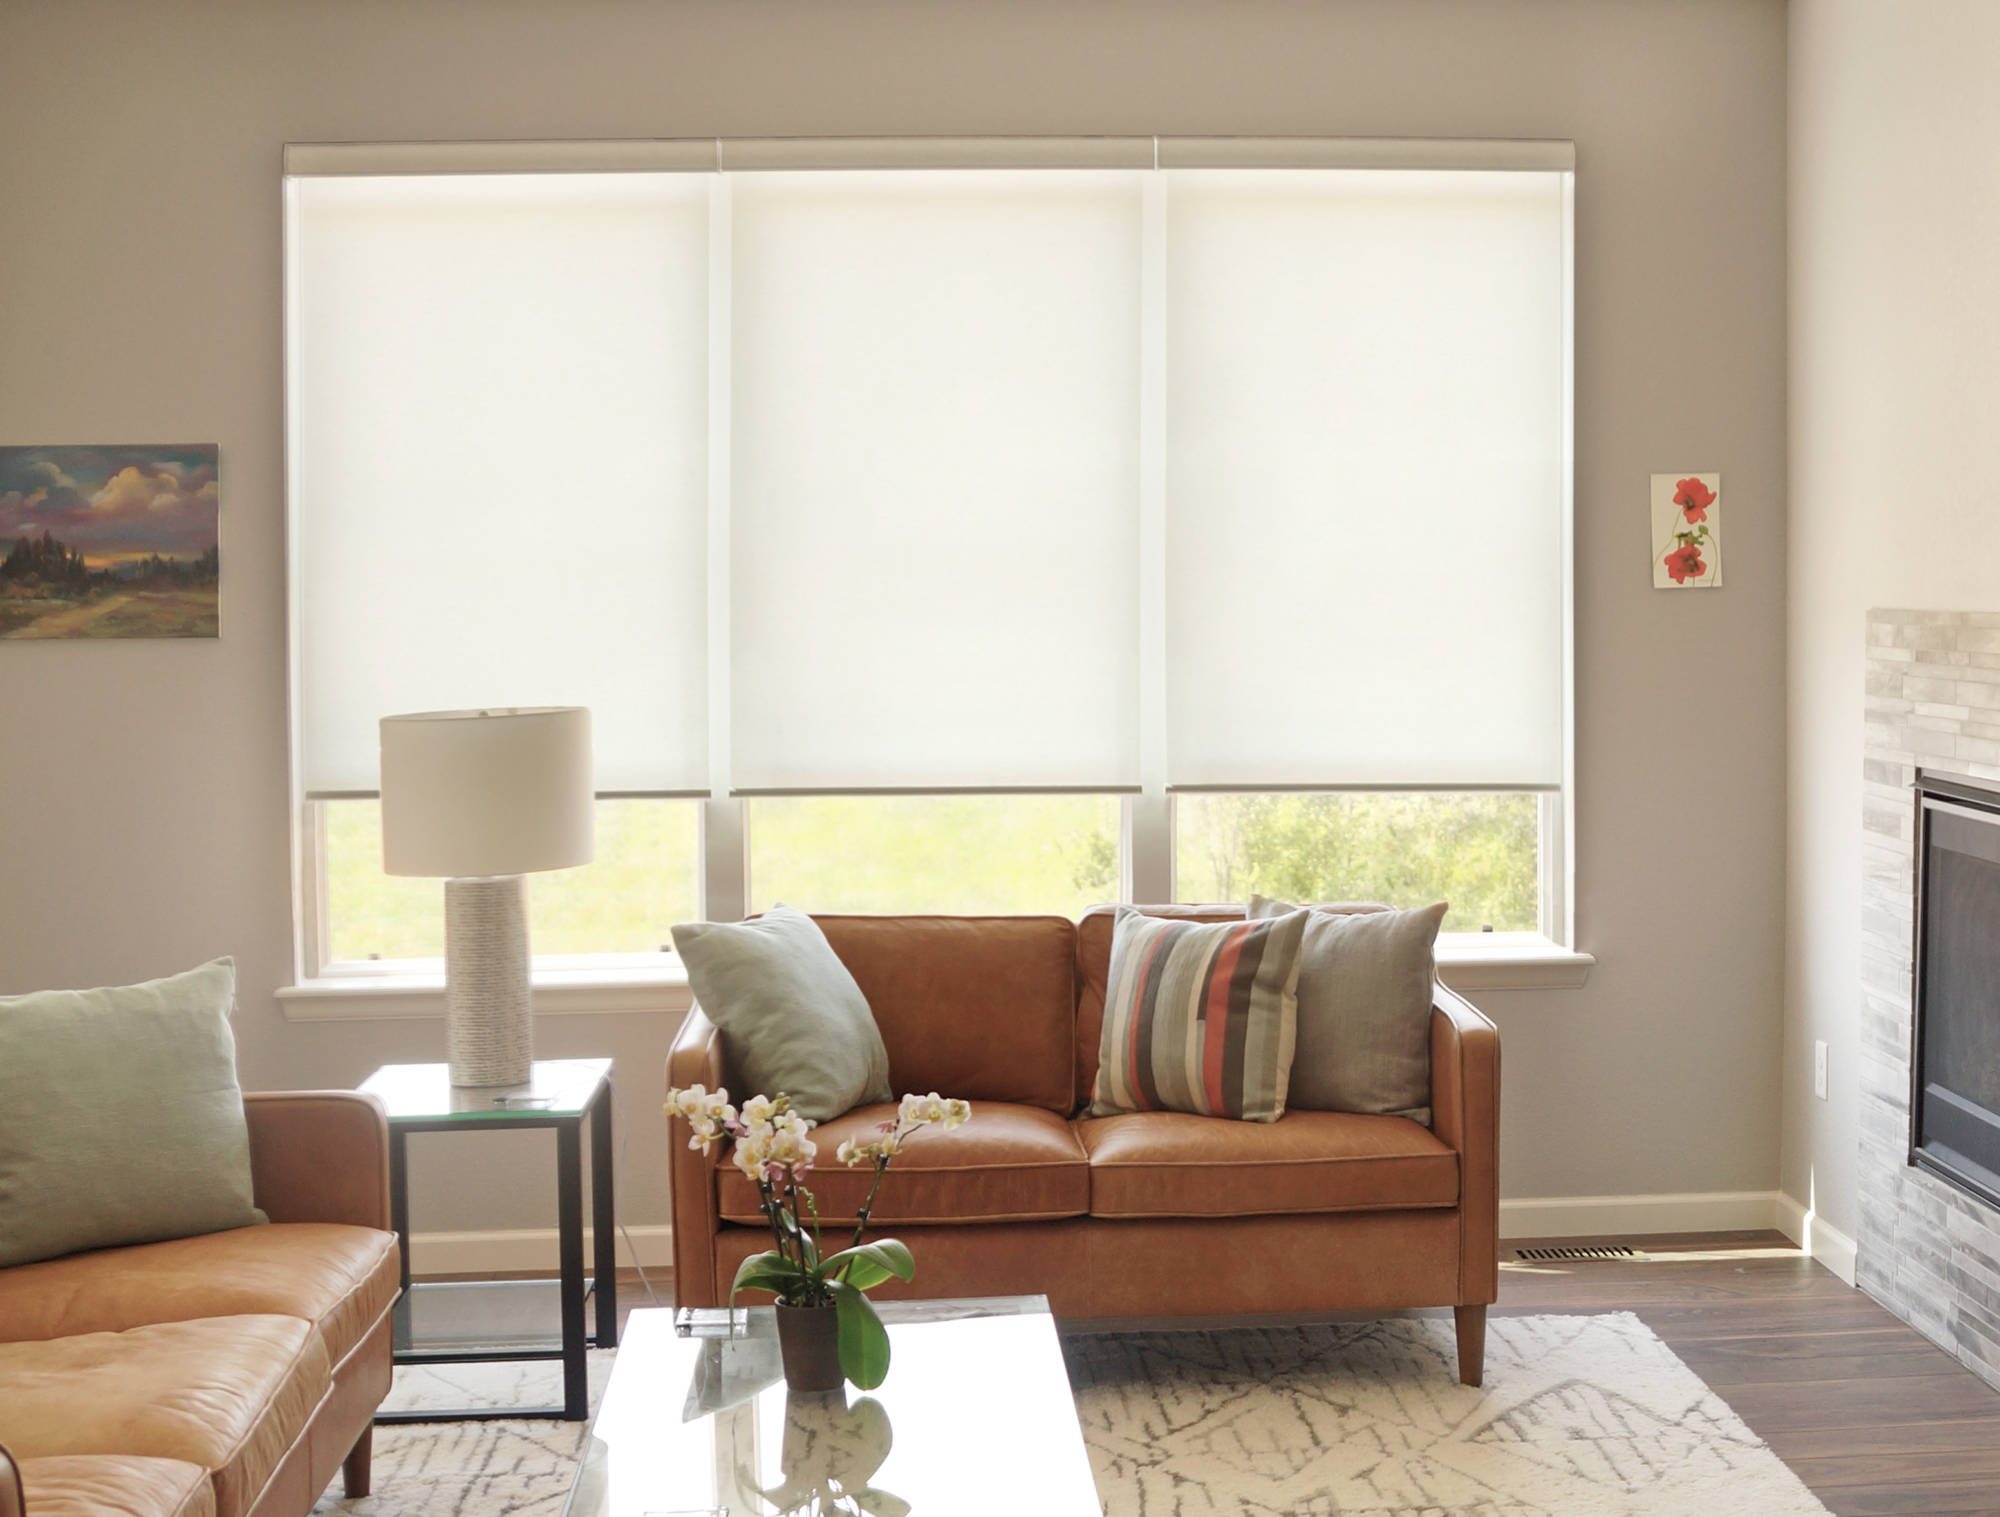 Insolroll Elements Roller Shades with translucent fabric